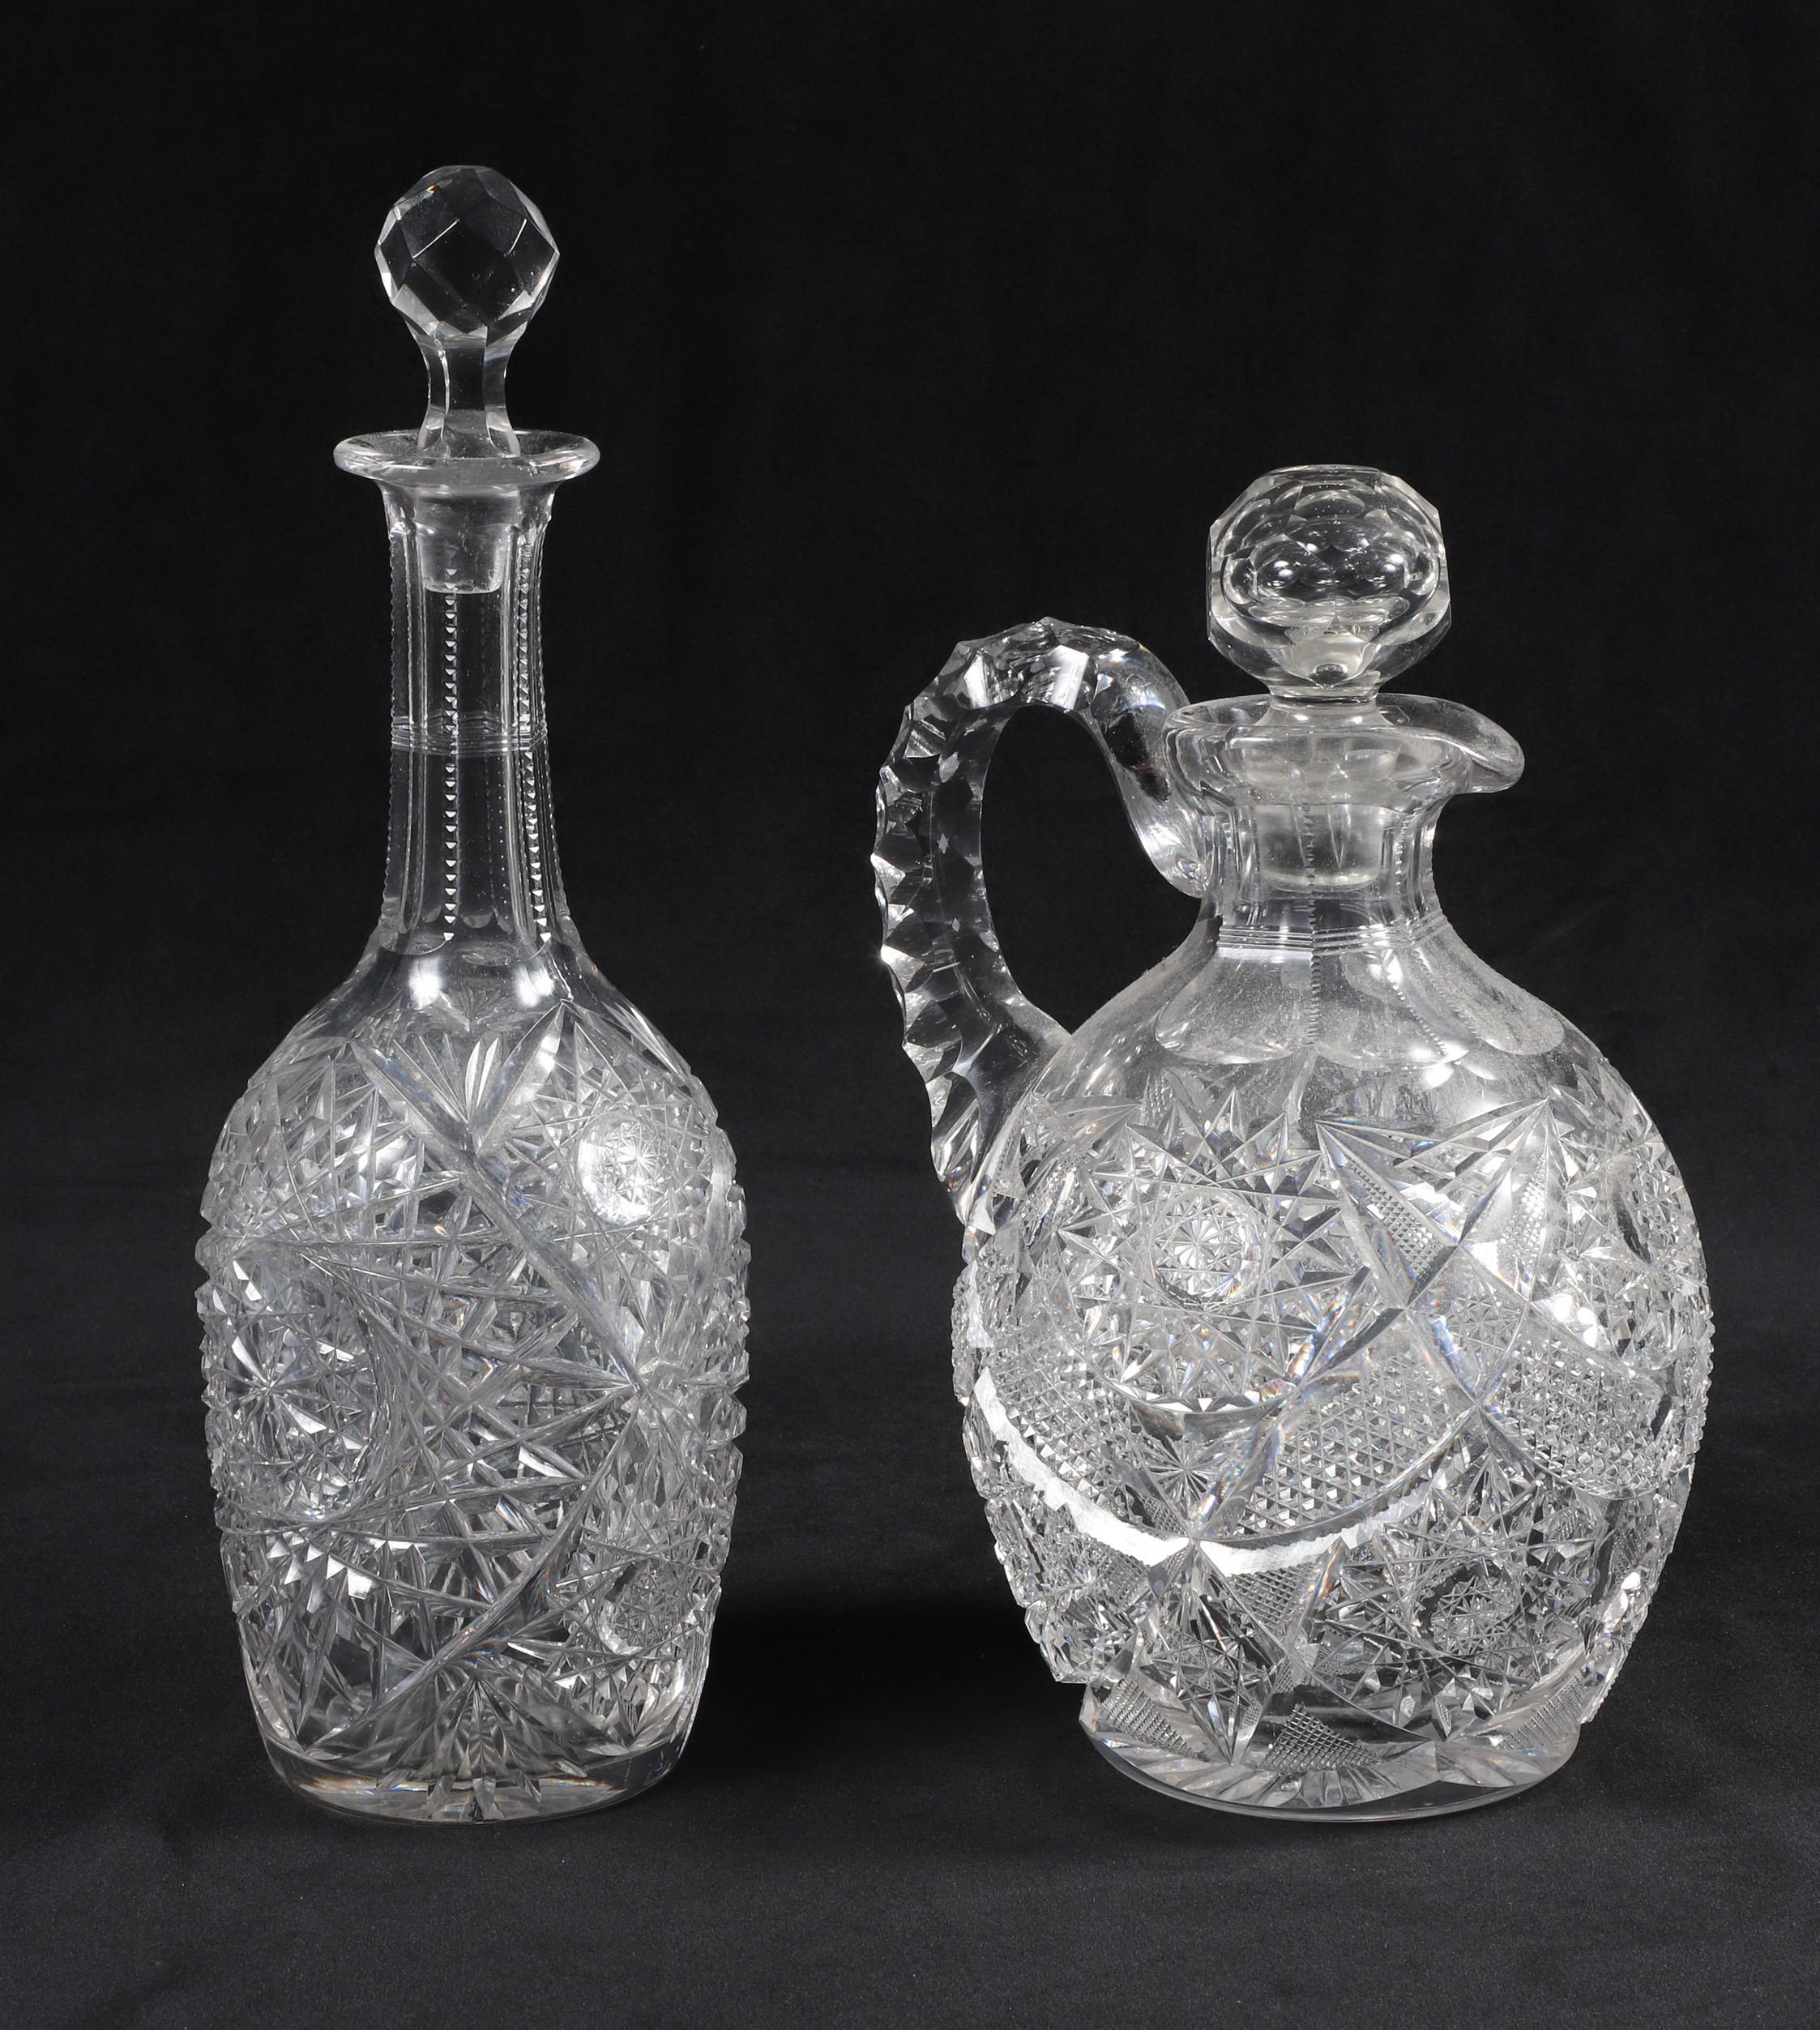  2 ABCG decanters to include cut 317eba